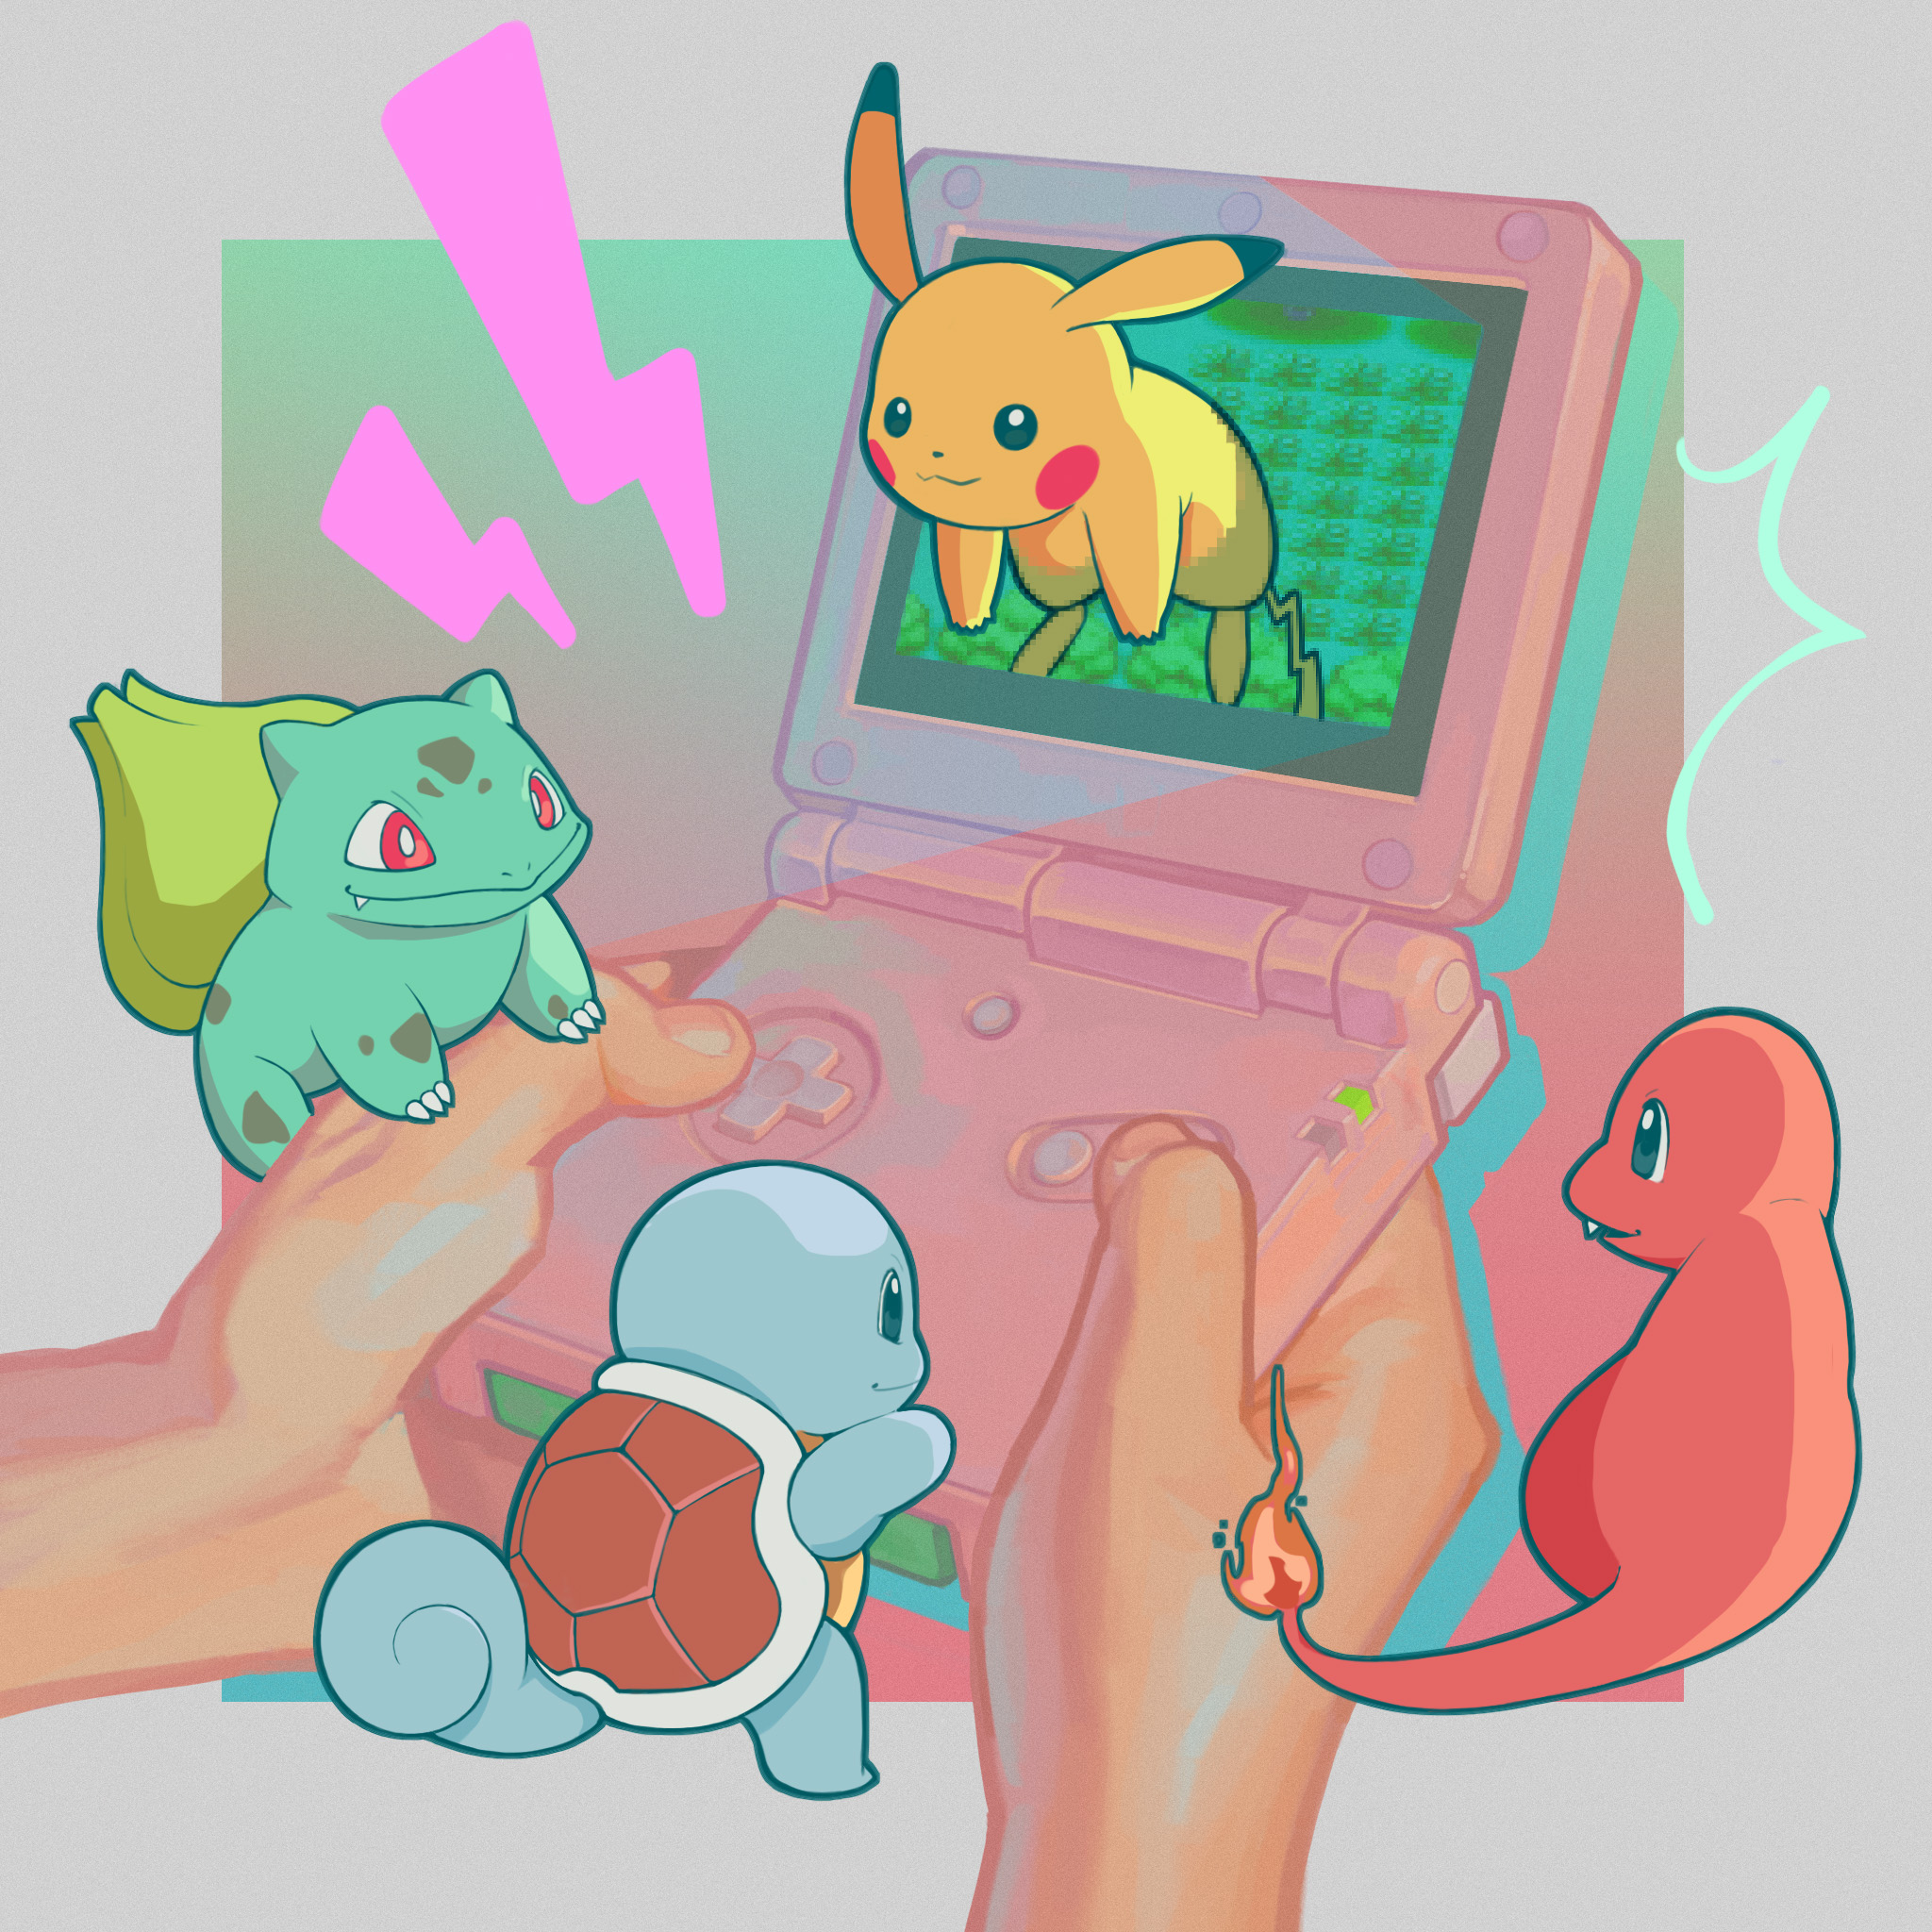  / Illustration of Bulbasaur, Squirtle, Charmander, and Pikachu interacting with a Game Boy Advance SP. Clip Studio Paint